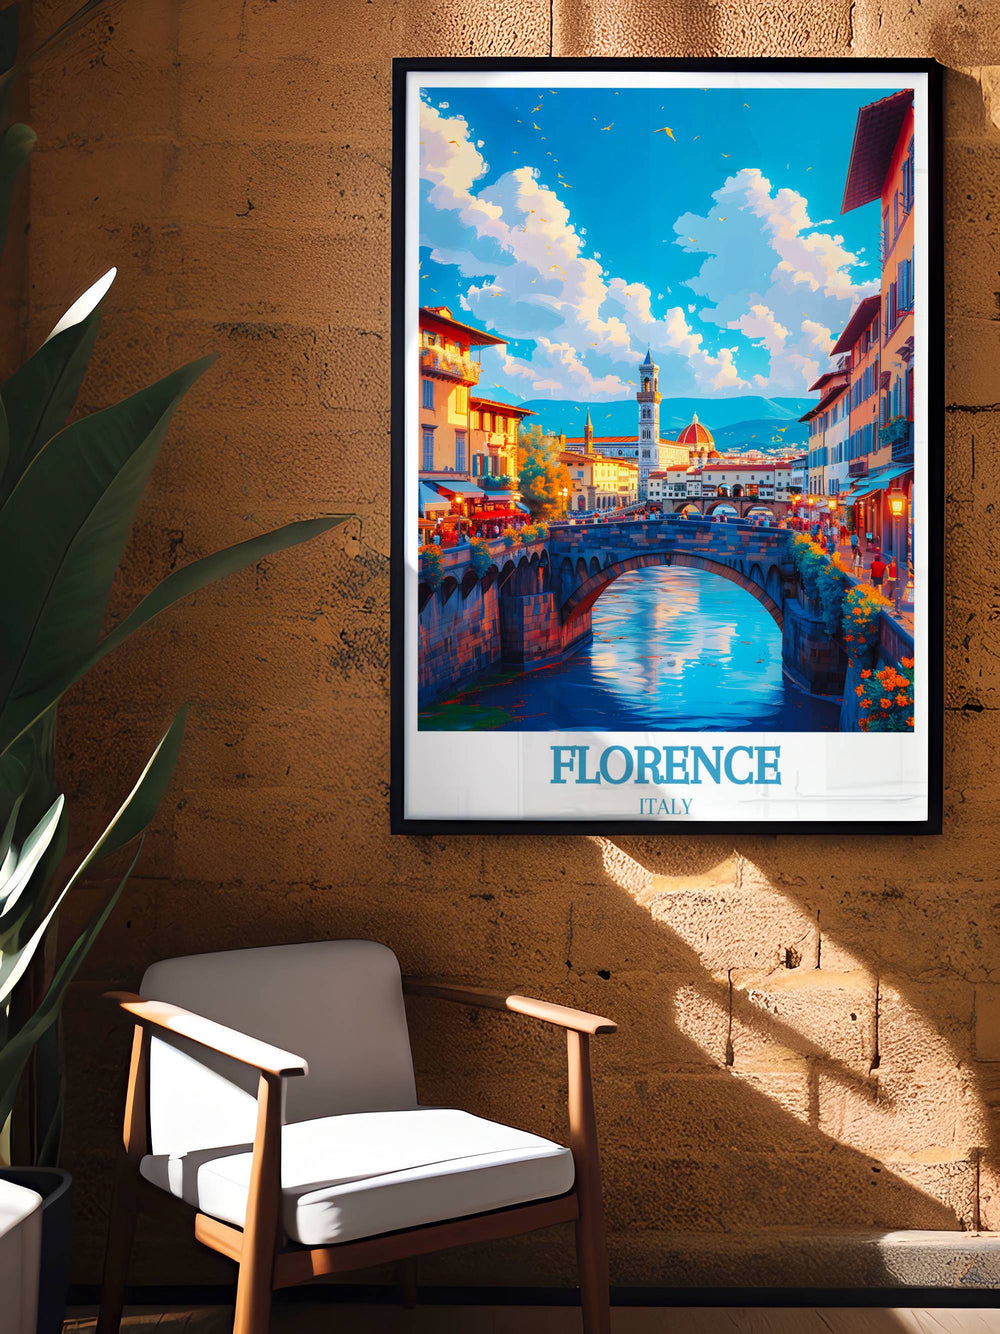 Festive lights on Ponte Vecchio turn the bridge into a celebratory travel poster, a vibrant decor print for those who love art that captures the spirit of Florence